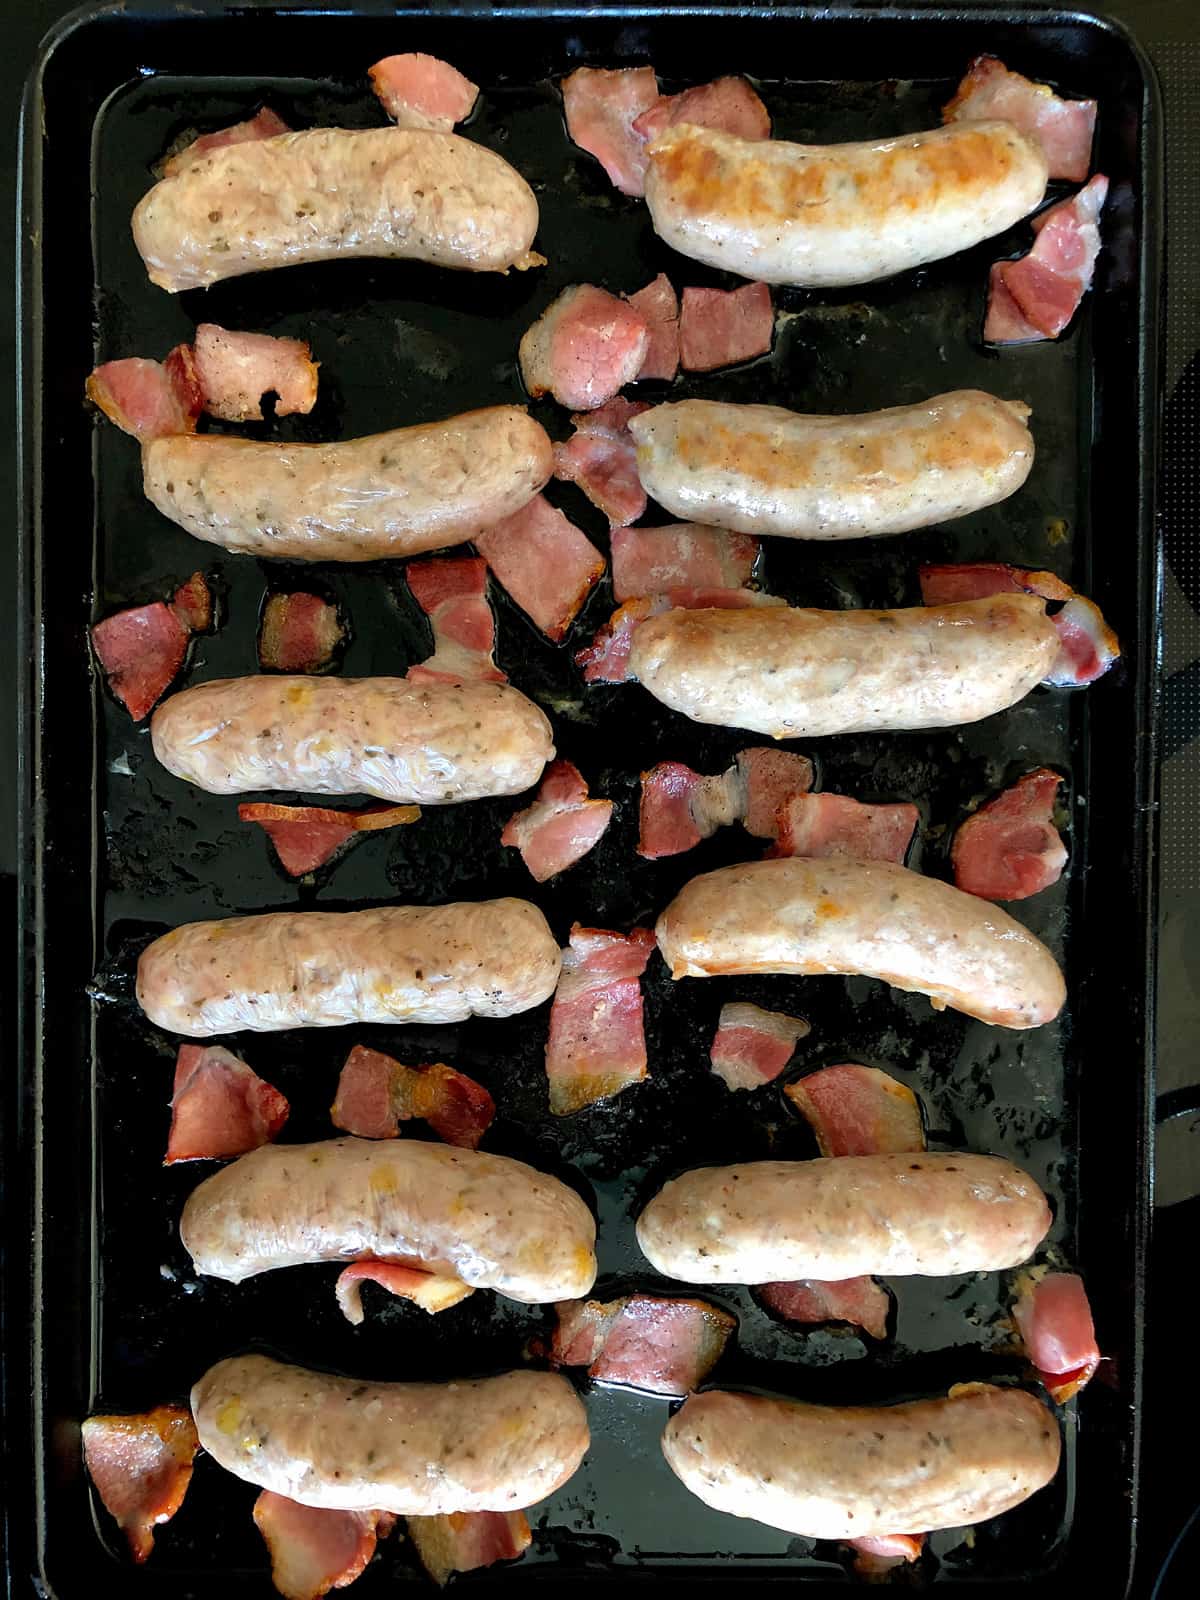 Sausages and pieces of bacon on a tray